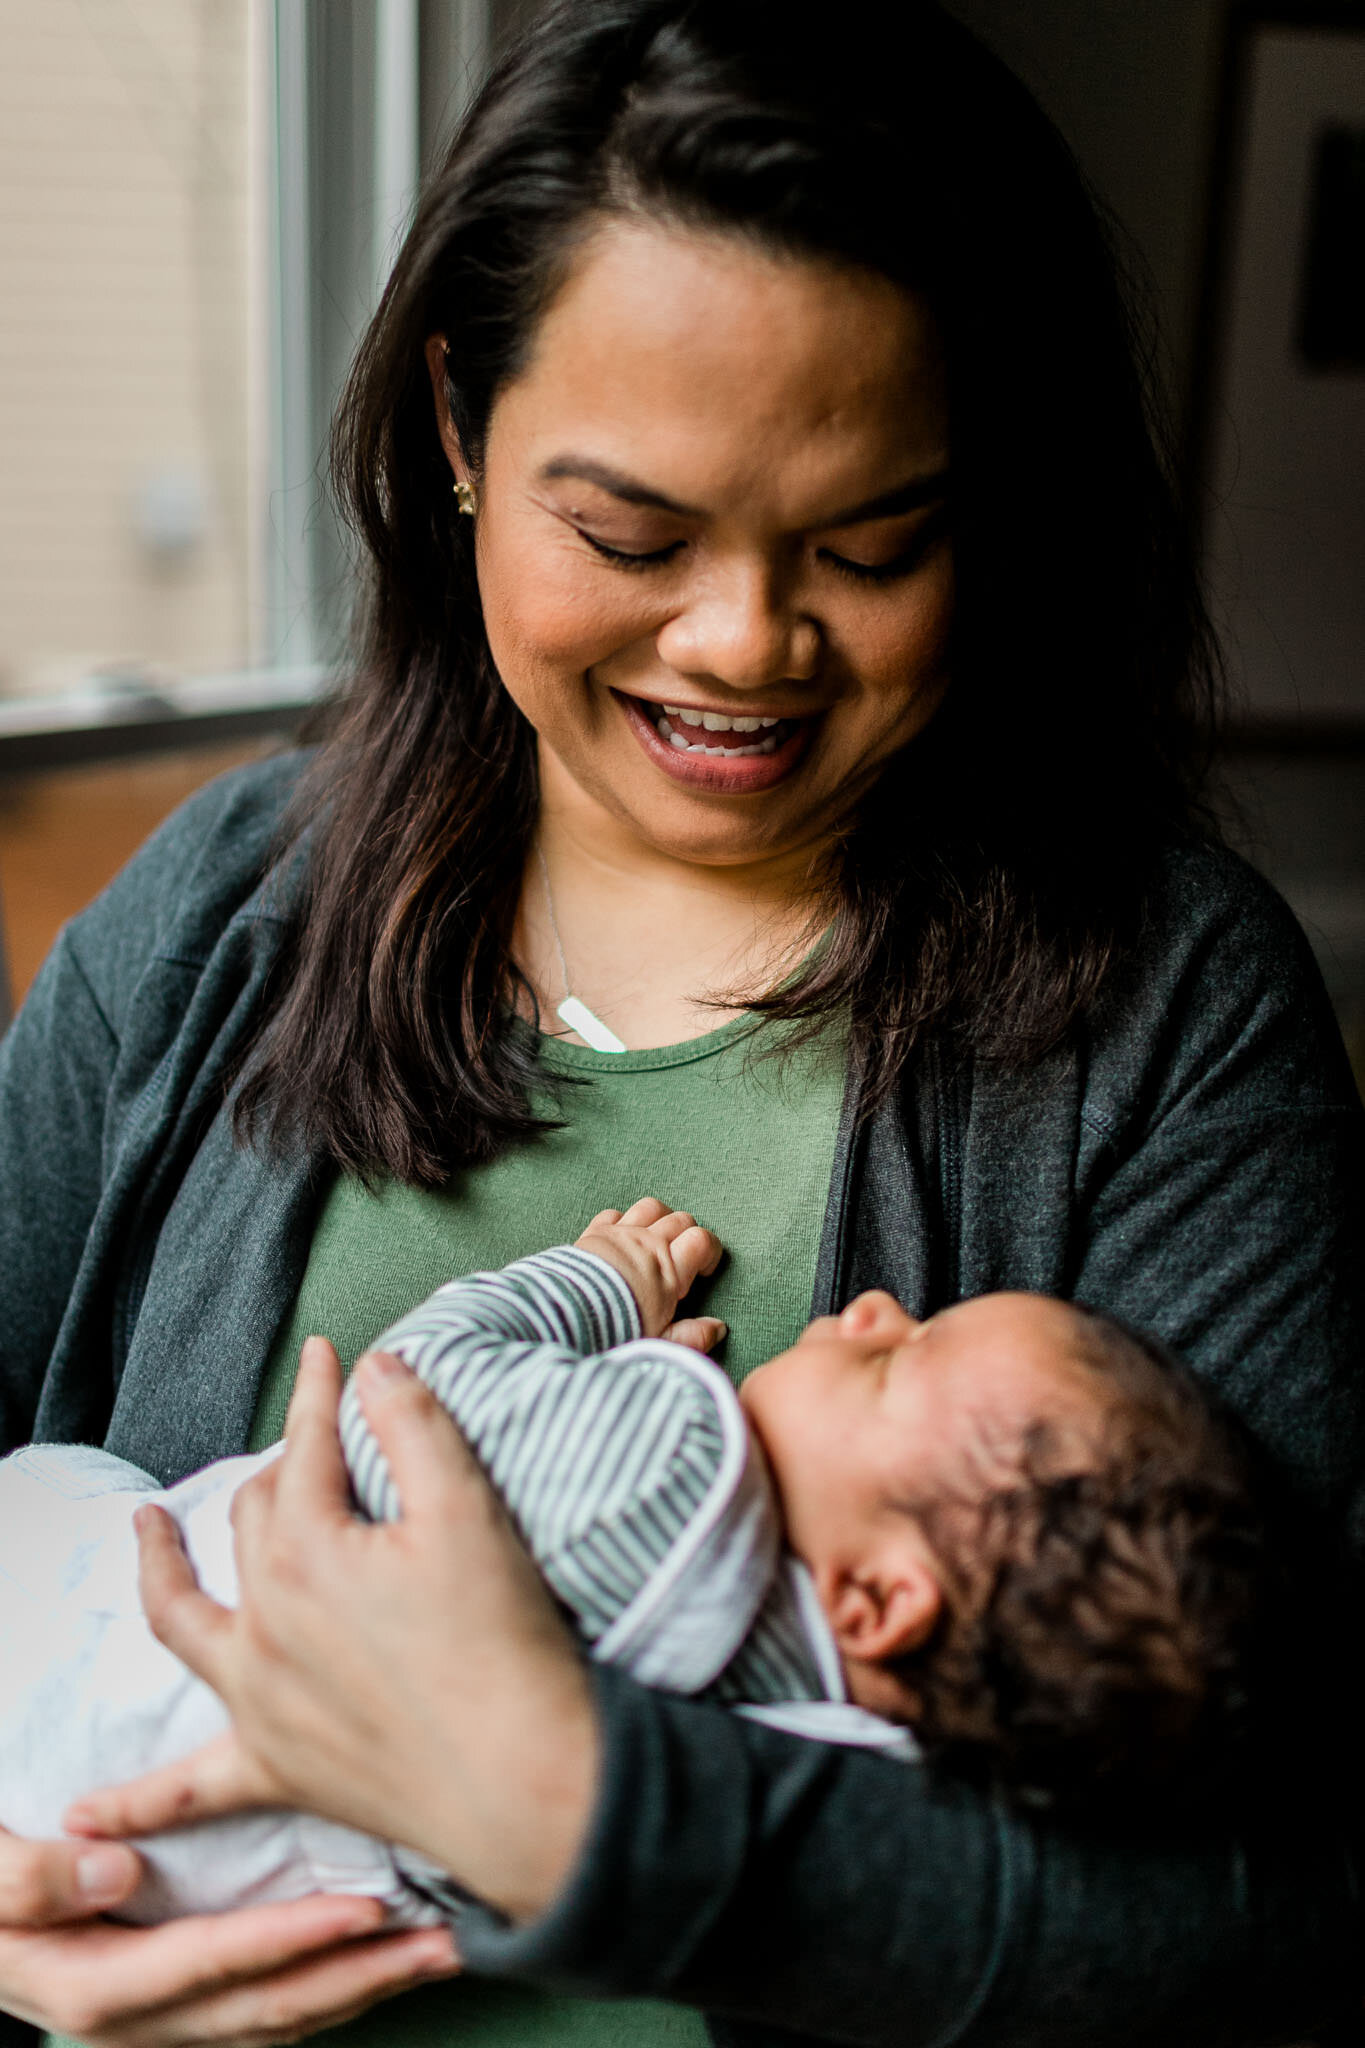 Raleigh Newborn Photographer | By G. Lin Photography | Mother holding baby boy and smiling at home